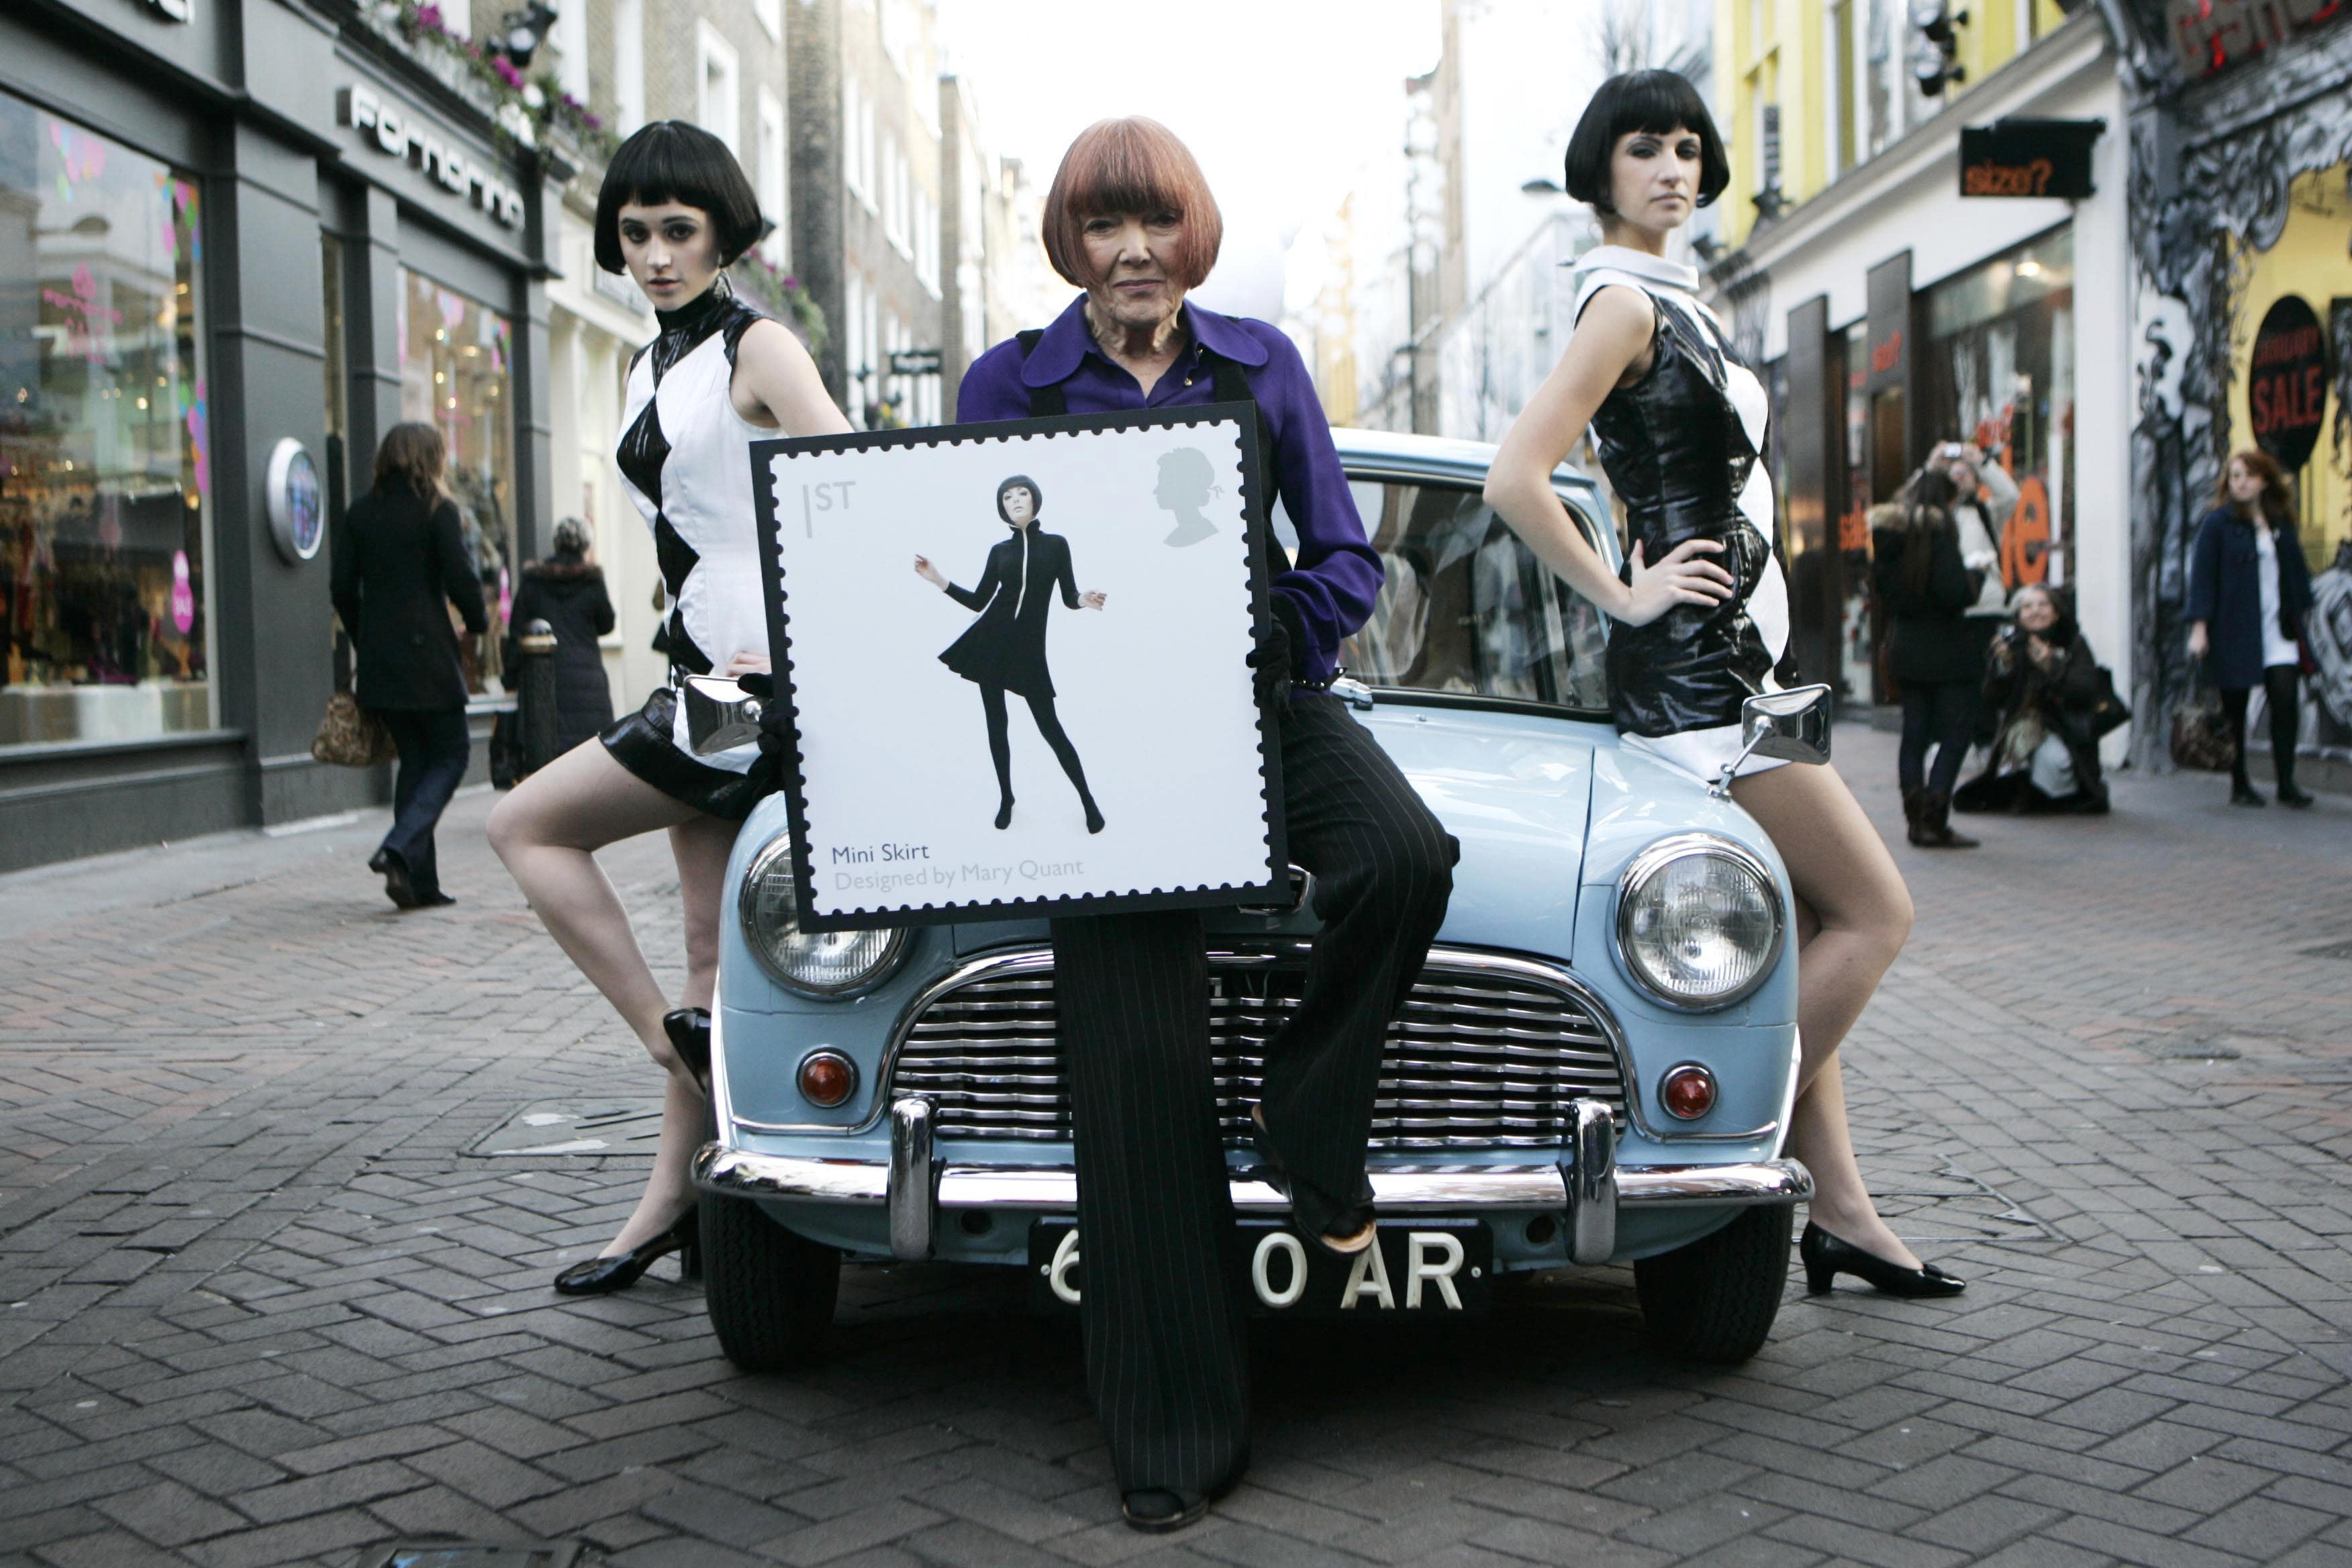 Mary Quant (David Parry/PA)